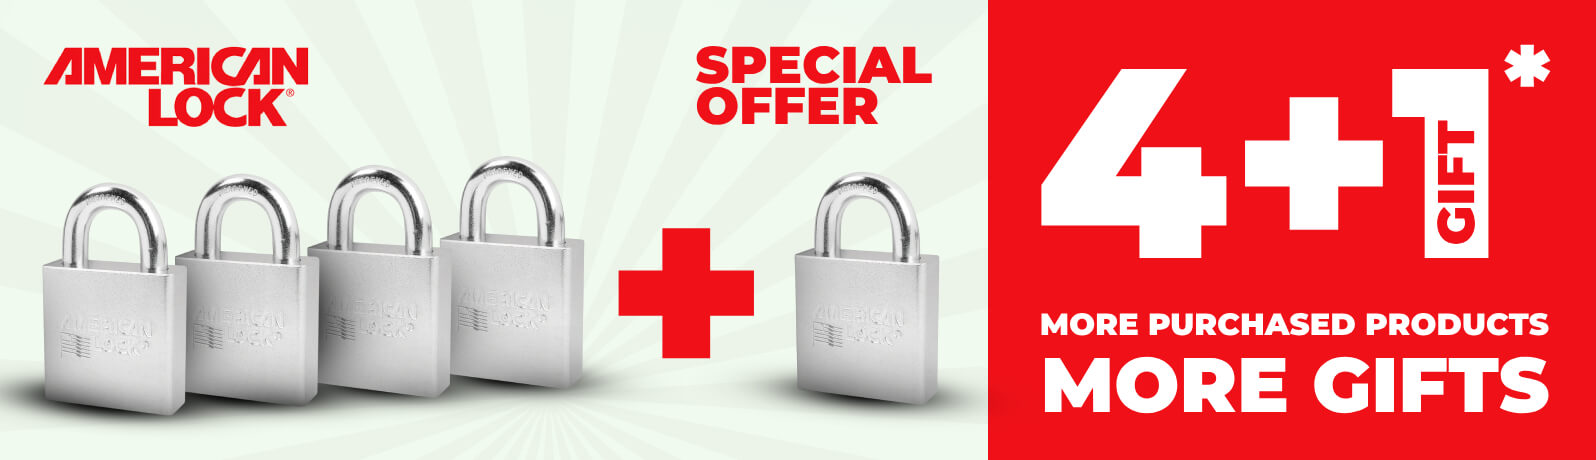 American Lock Special Offer!